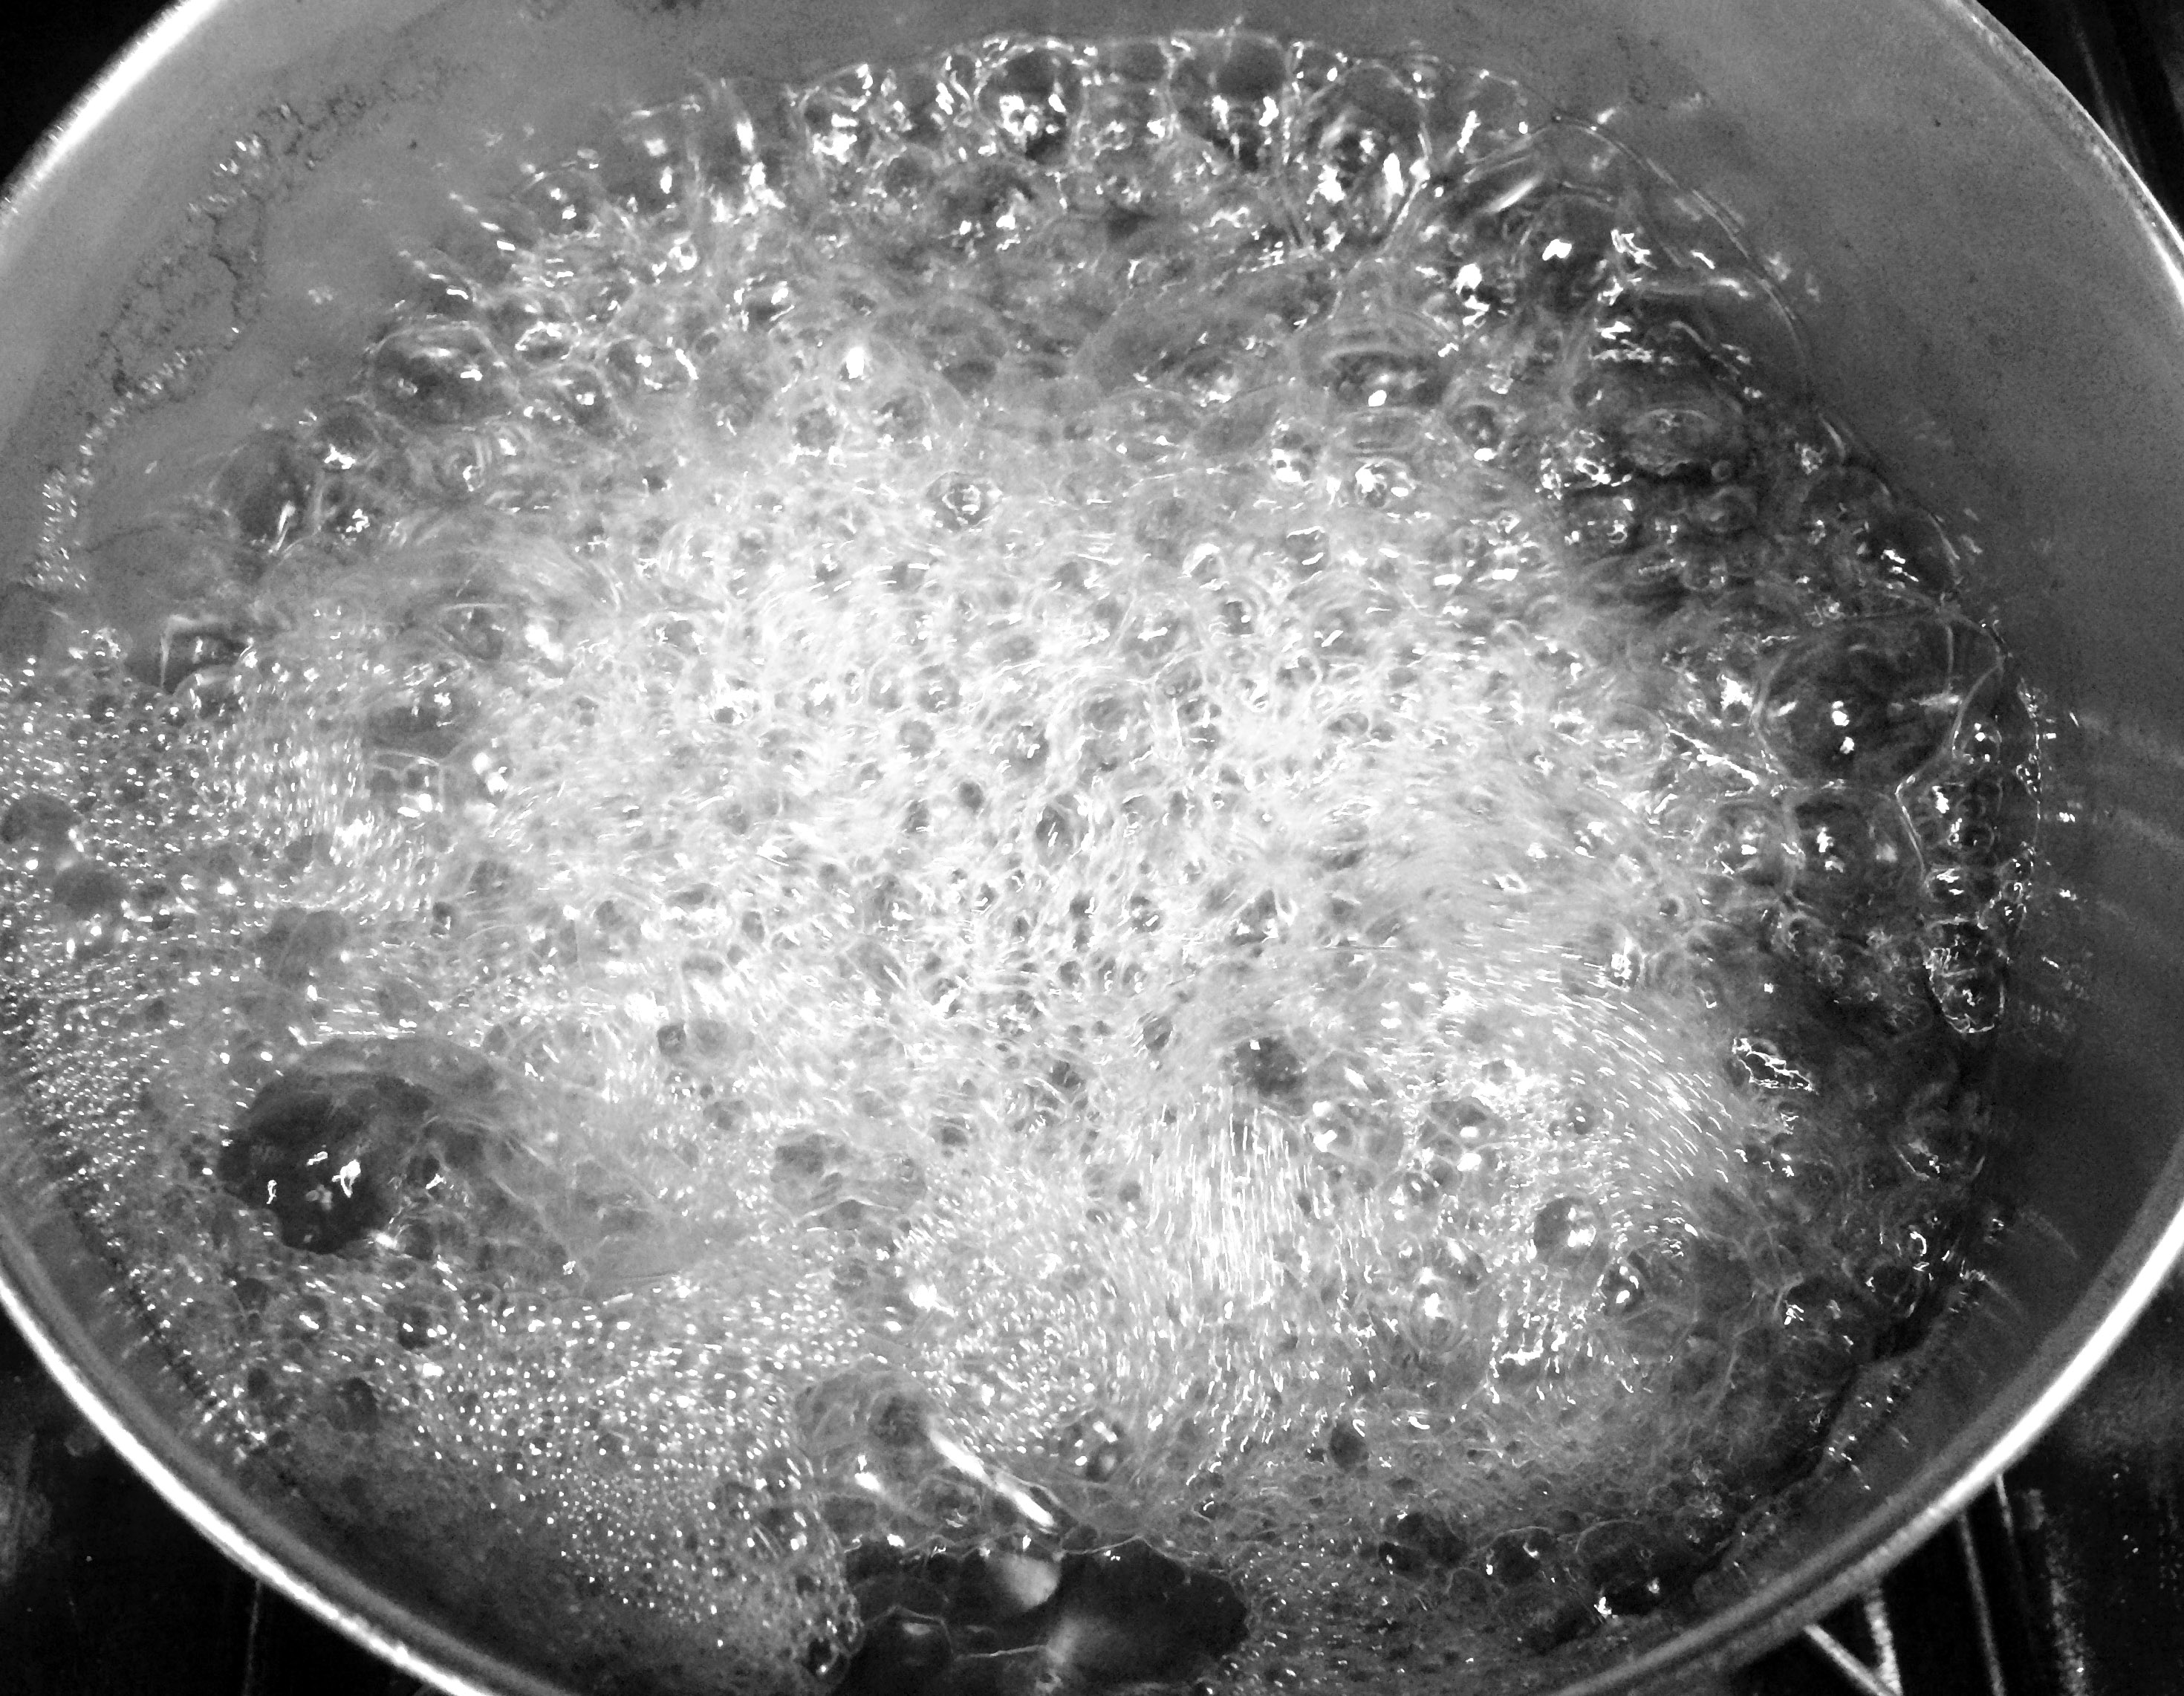 Boiling water and sugar - Escoffier At Home